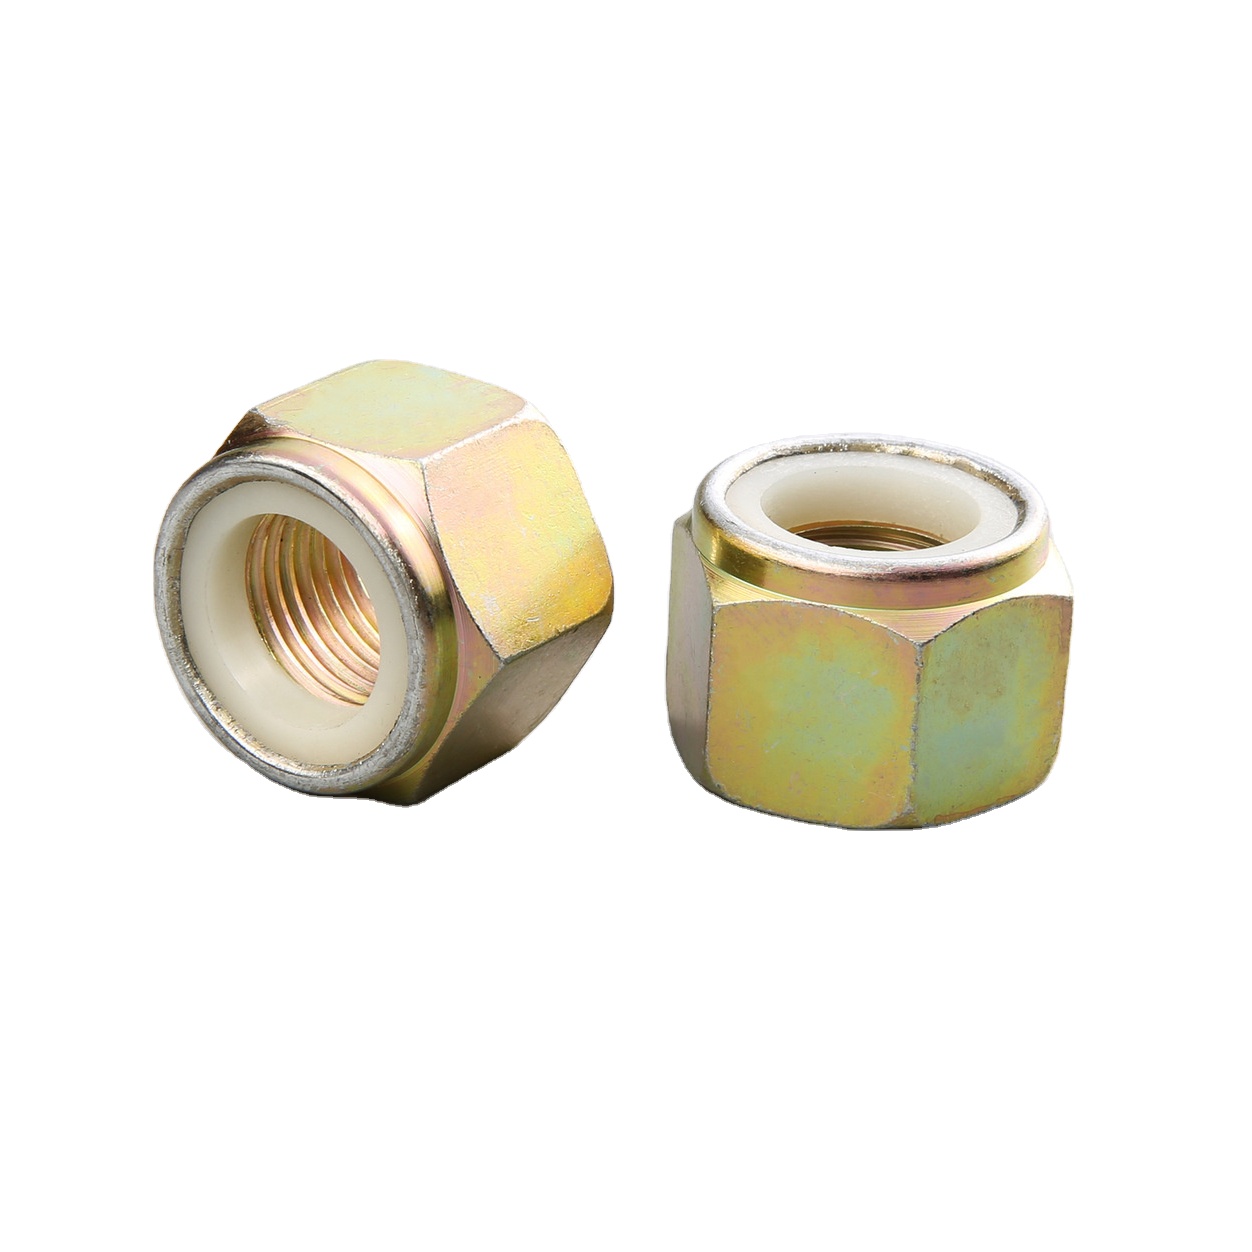 Hot sale DIN 985 DIN982 nylon insert lock nut with yellow color zinc plated